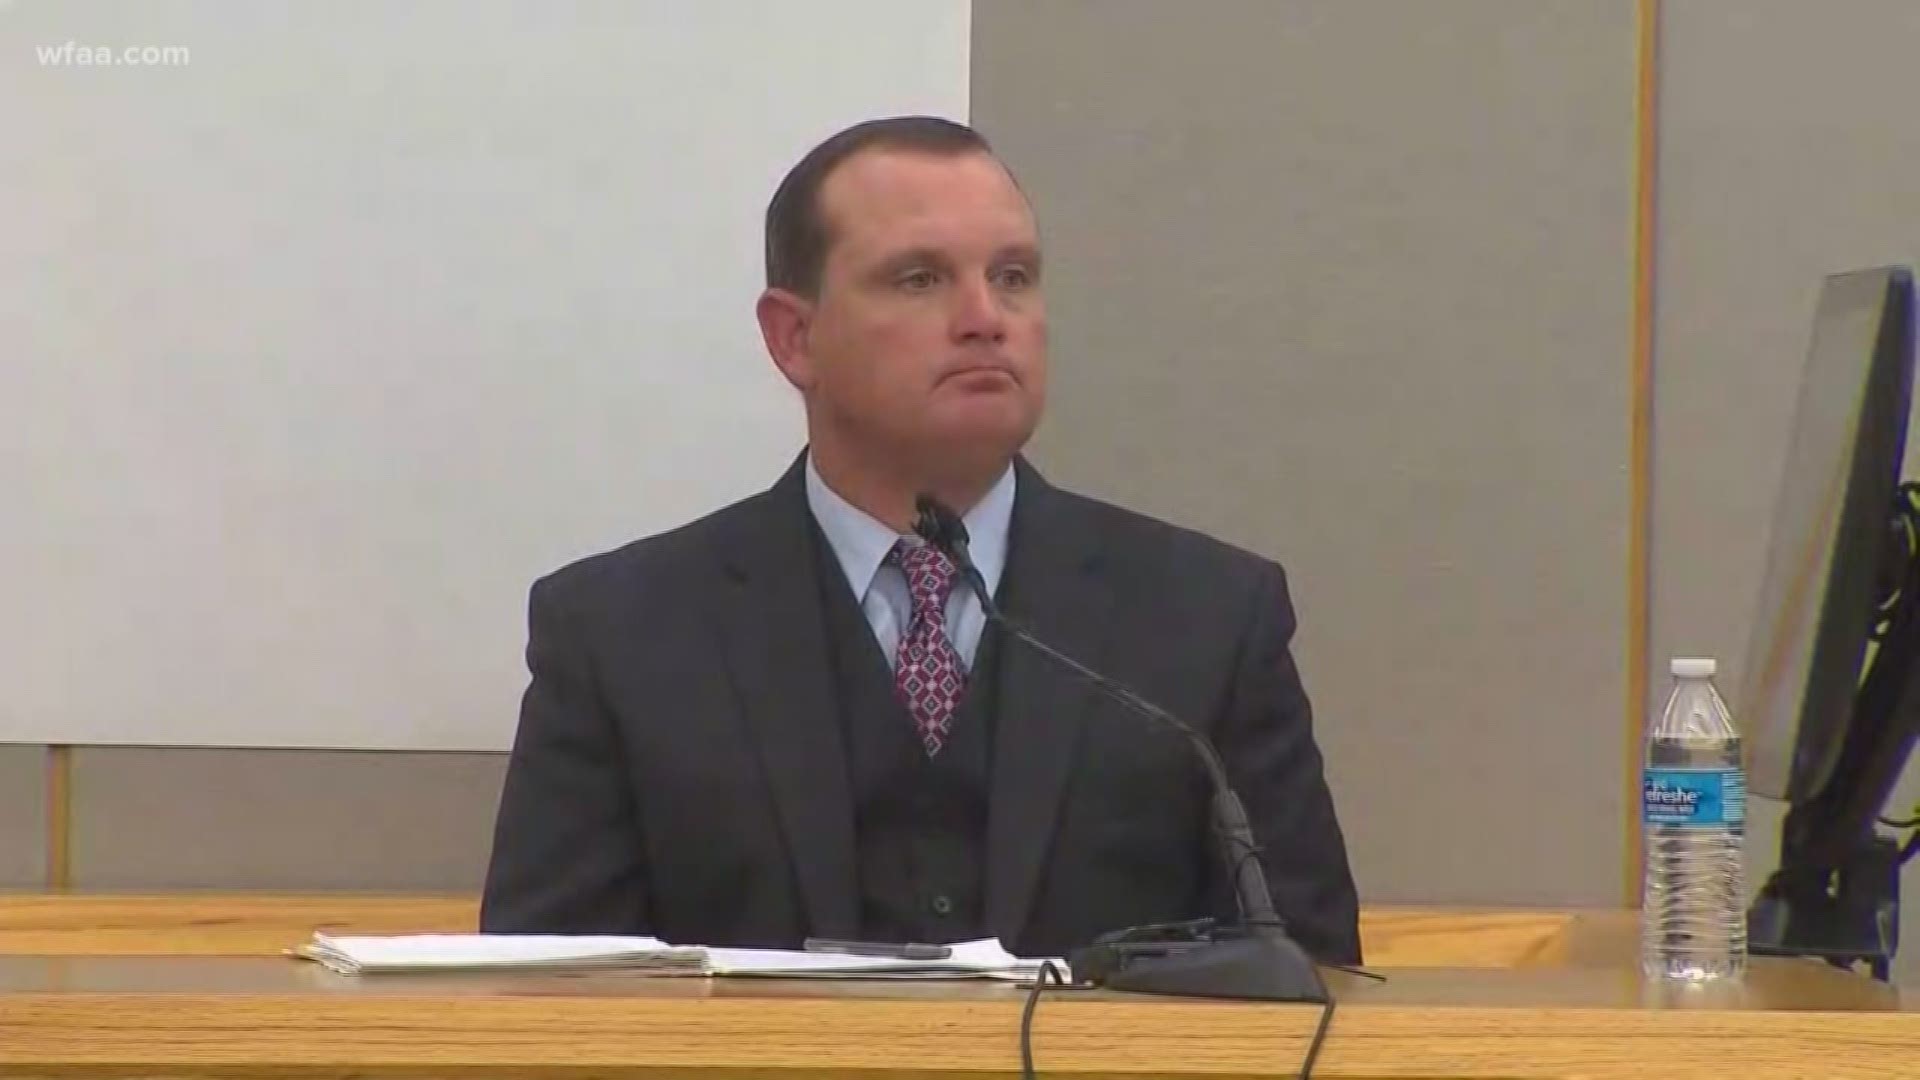 A Mesquite police detective testified he believed a fired officer was justified when he shot a man twice in the back, but another expert said the shooting was "unreasonable."